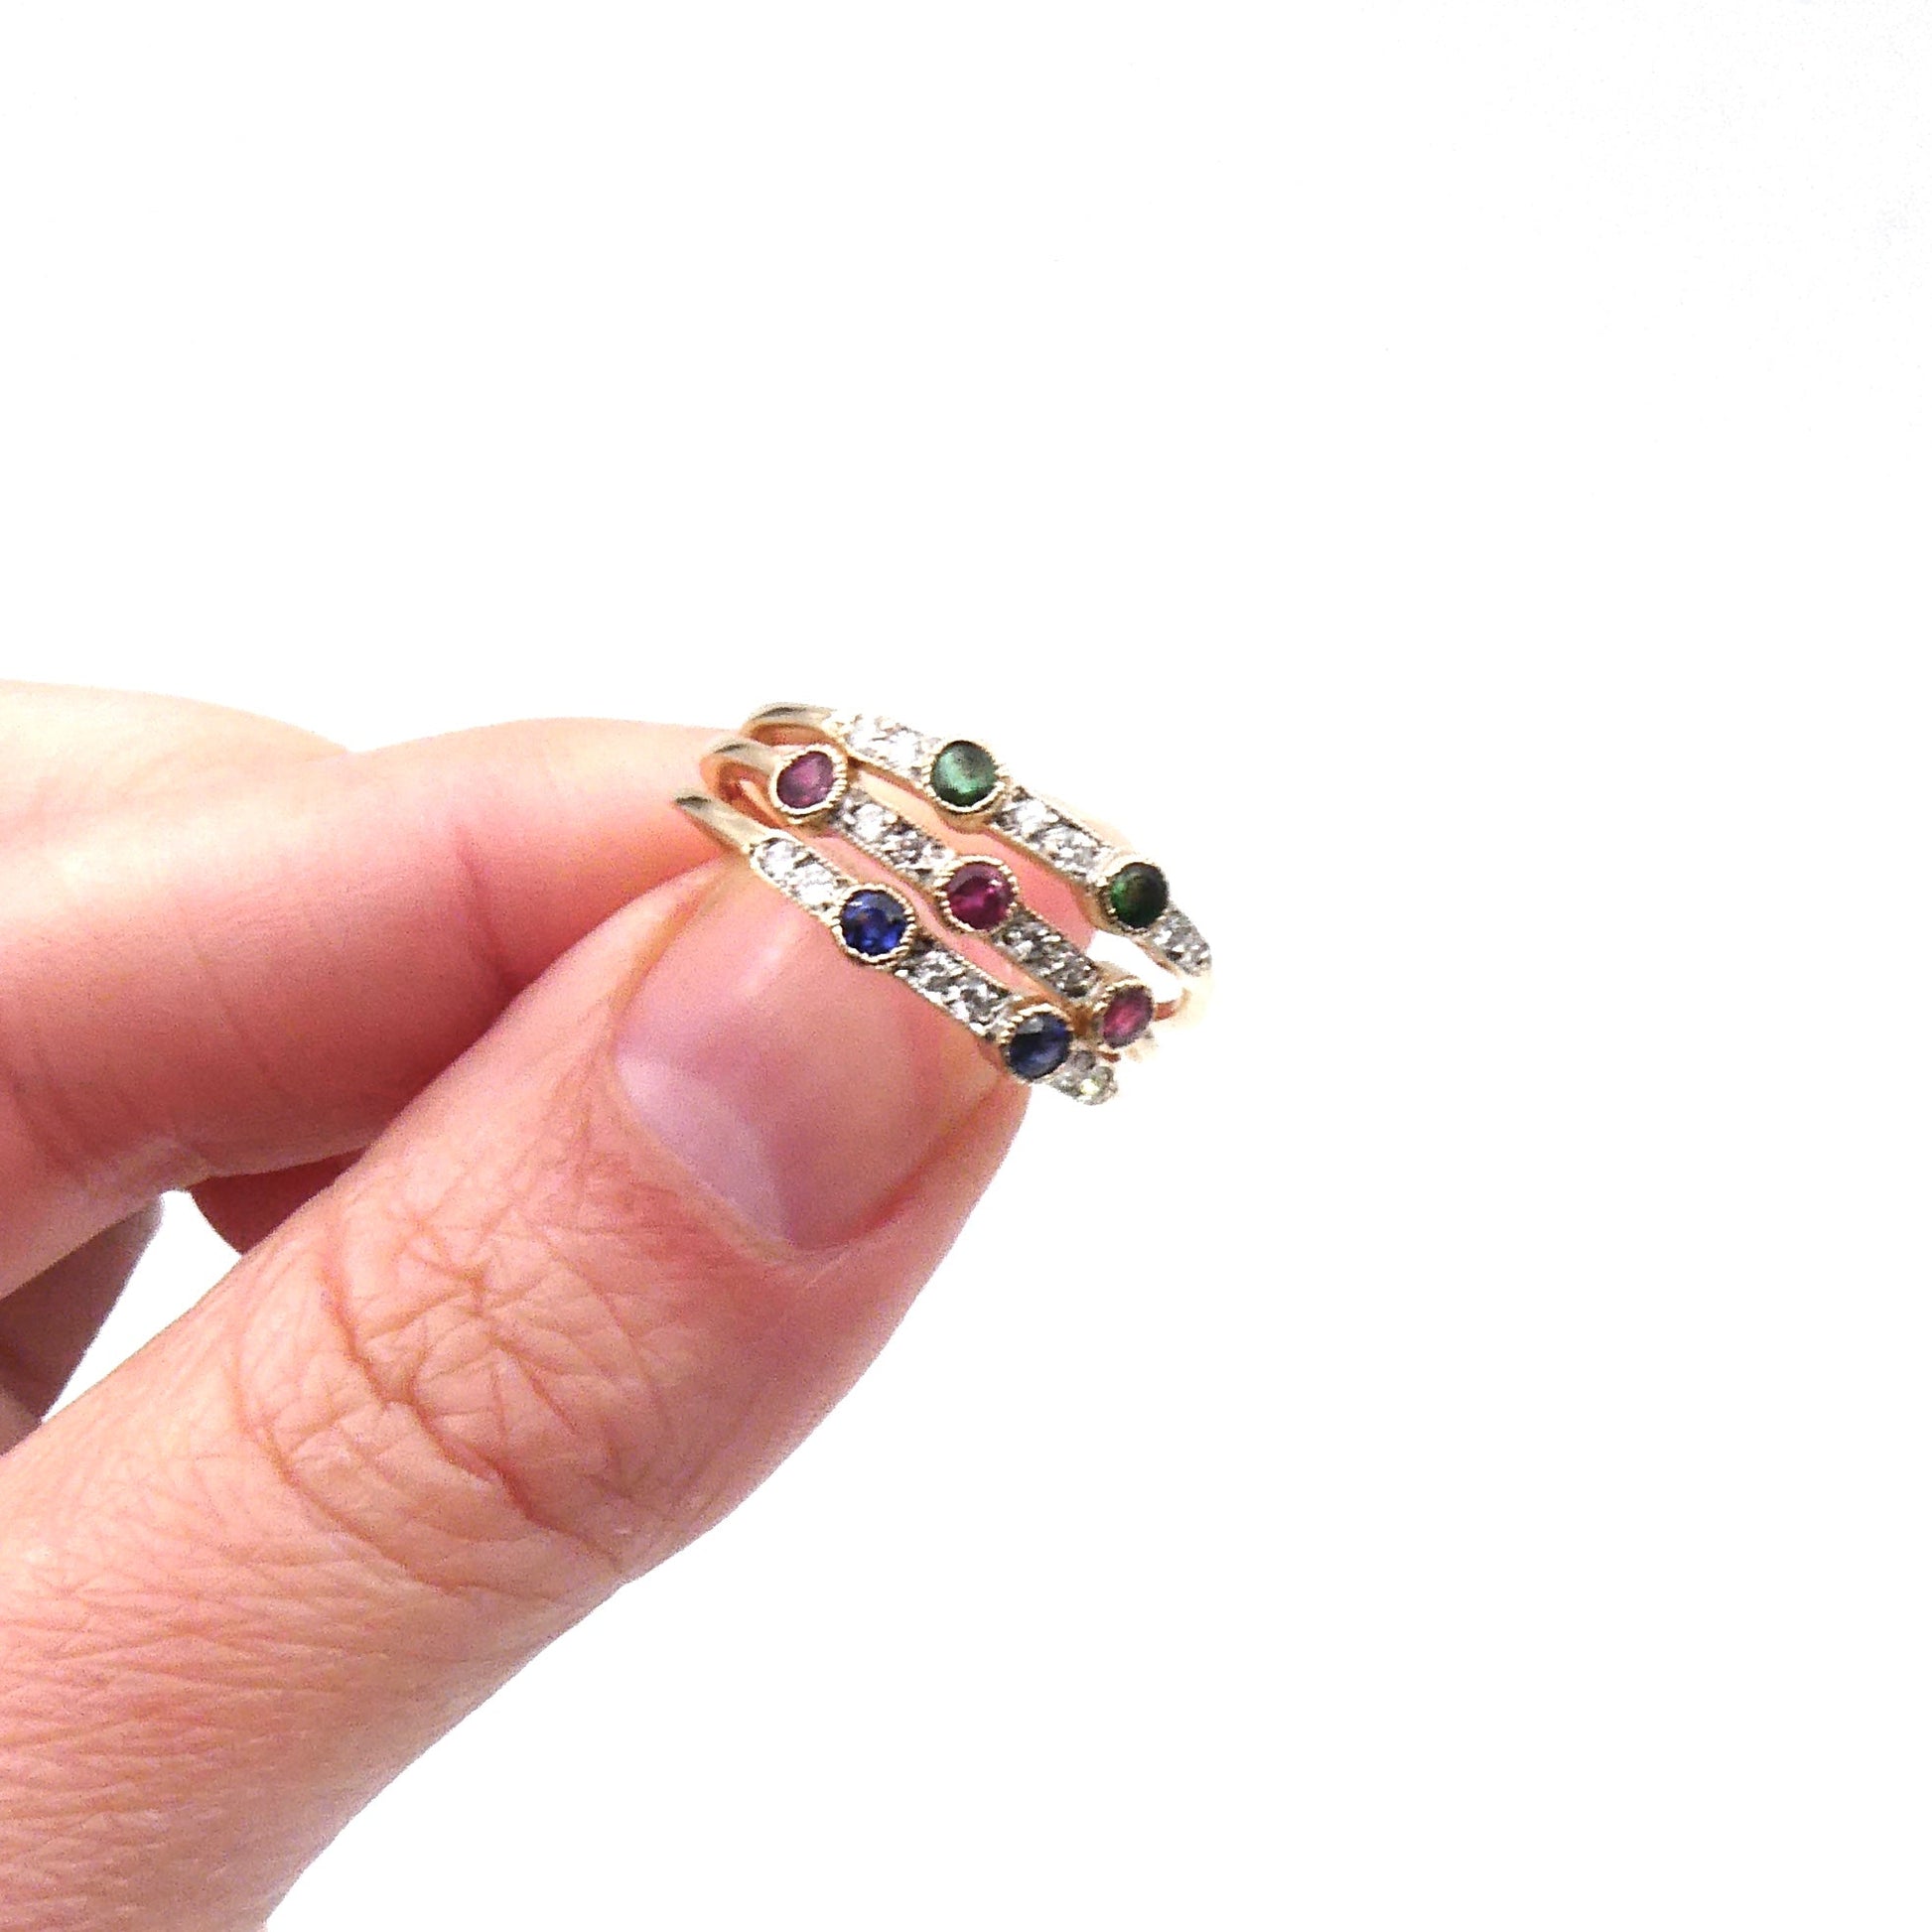 Three vintage rings set with emeralds, sapphires, rubies and diamonds. - Collected